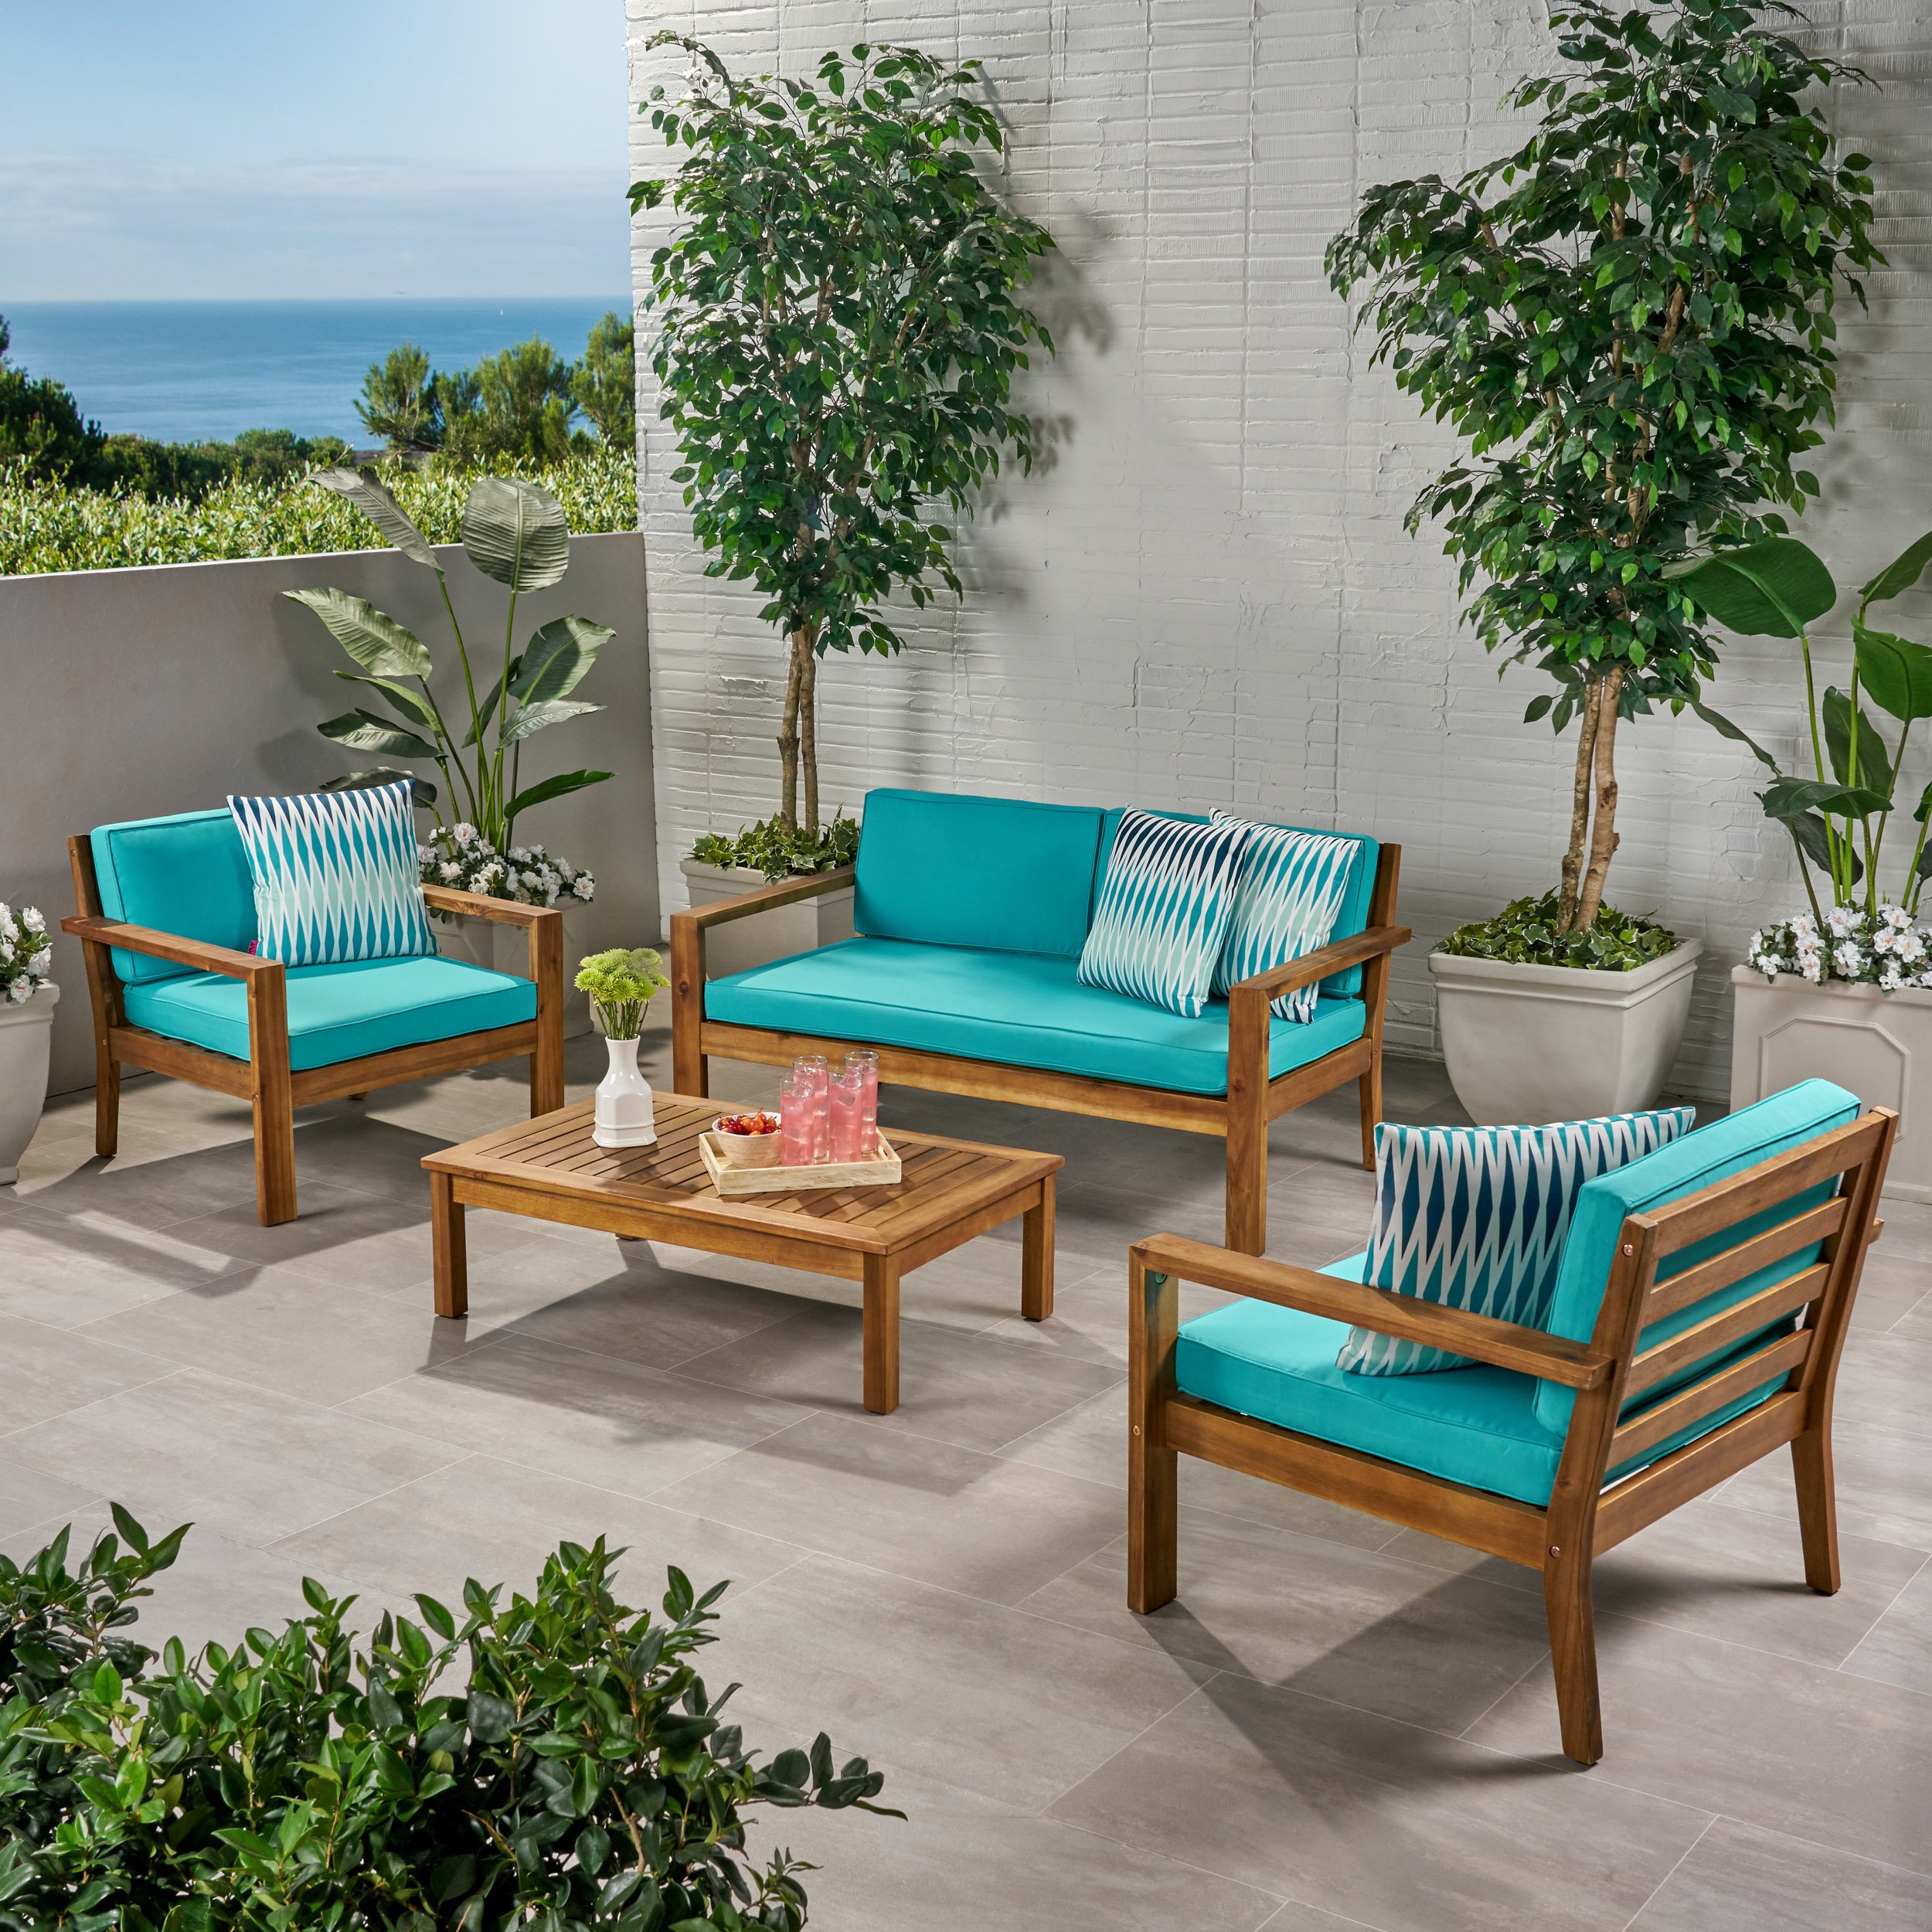 Gloria Outdoor 4 Seater Acacia Wood Chat Set With Cushions - Teak Finish, Teal